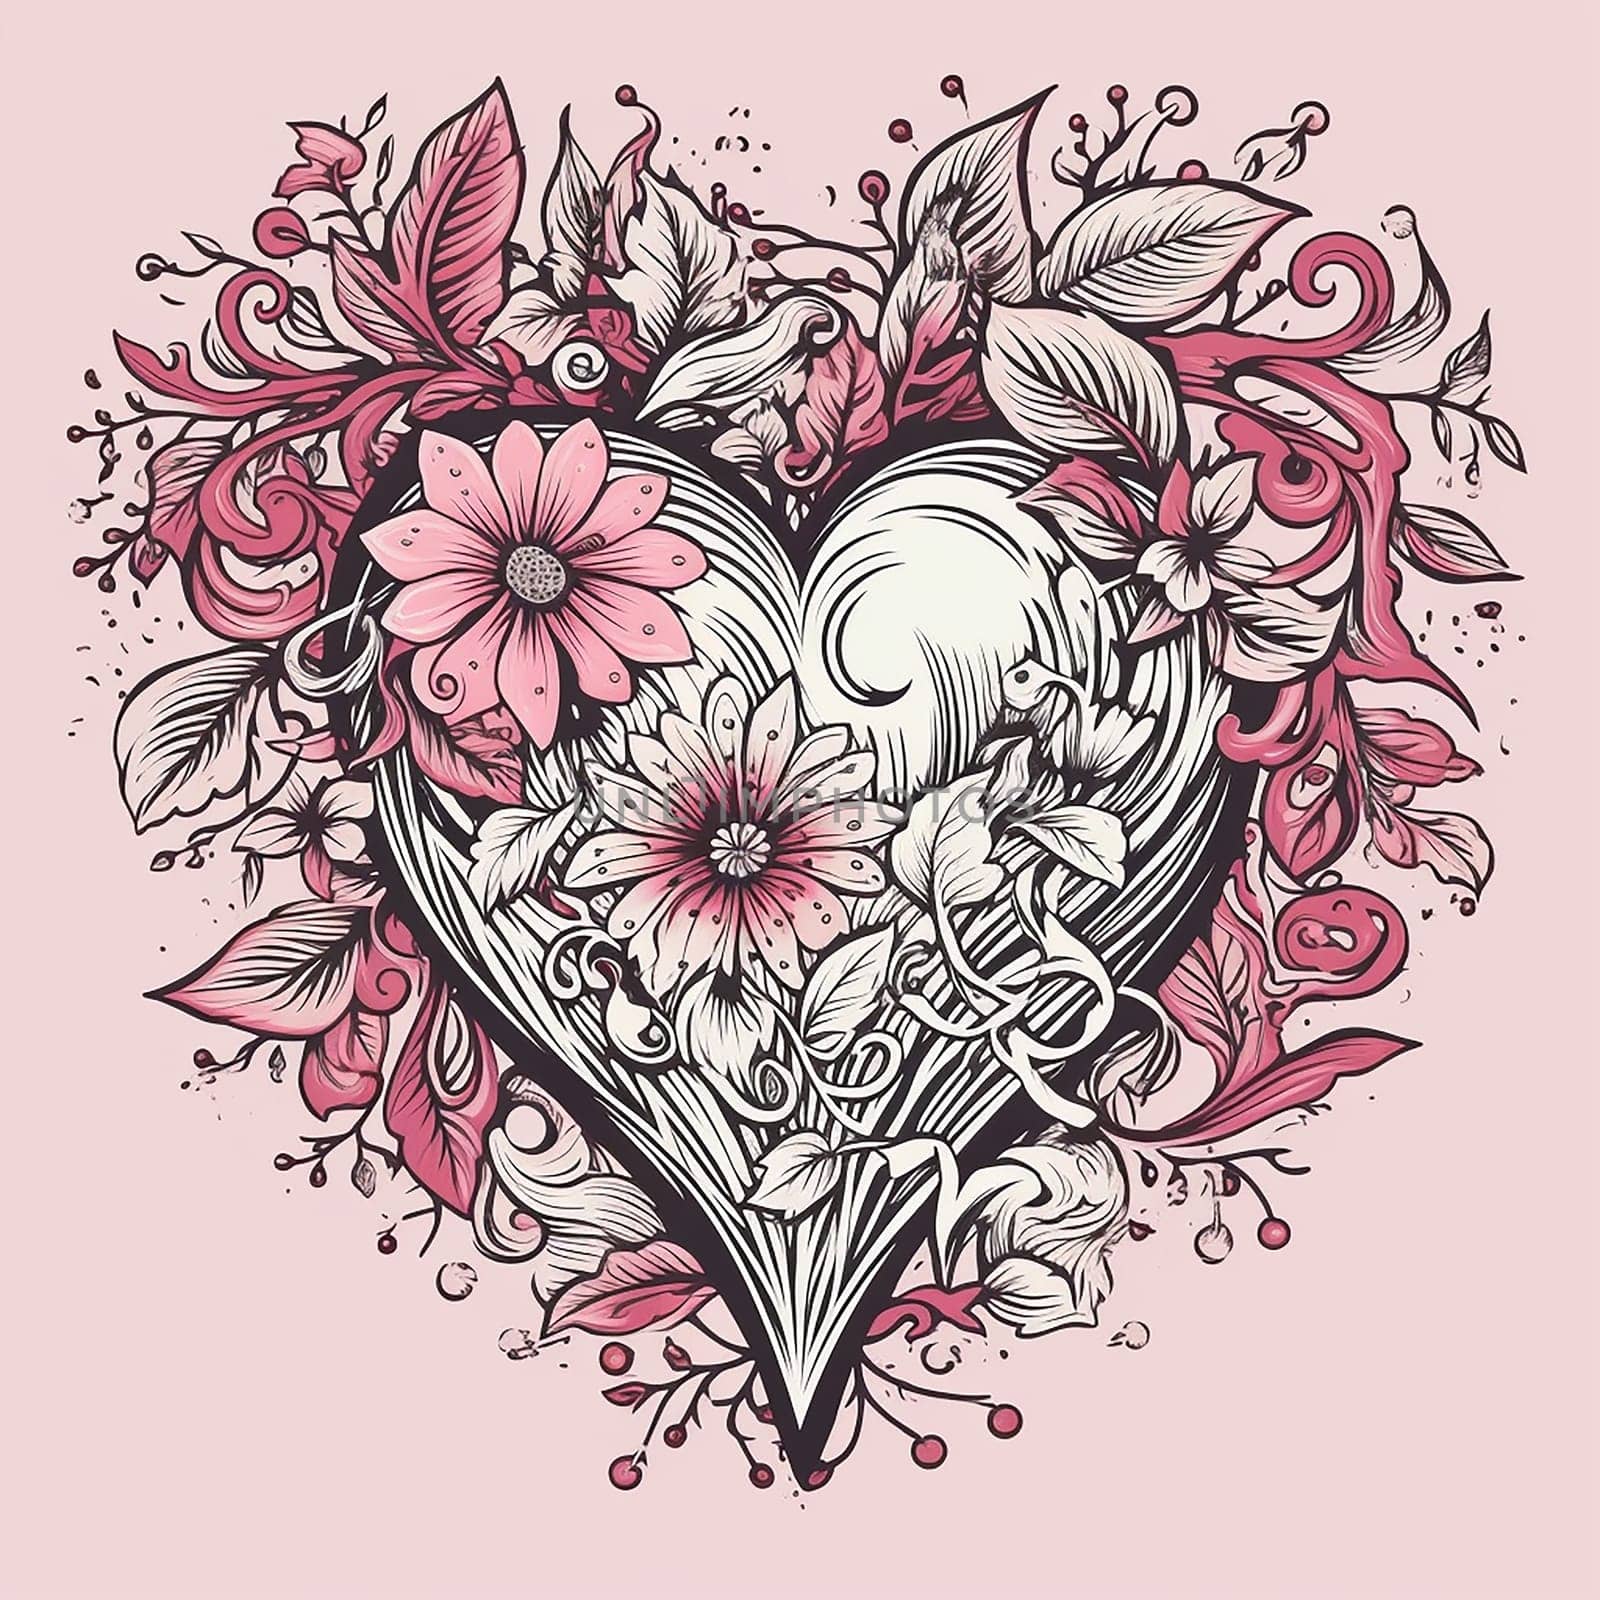 Stylized heart with intricate floral and wave details in a pink and white color scheme. by Hype2art